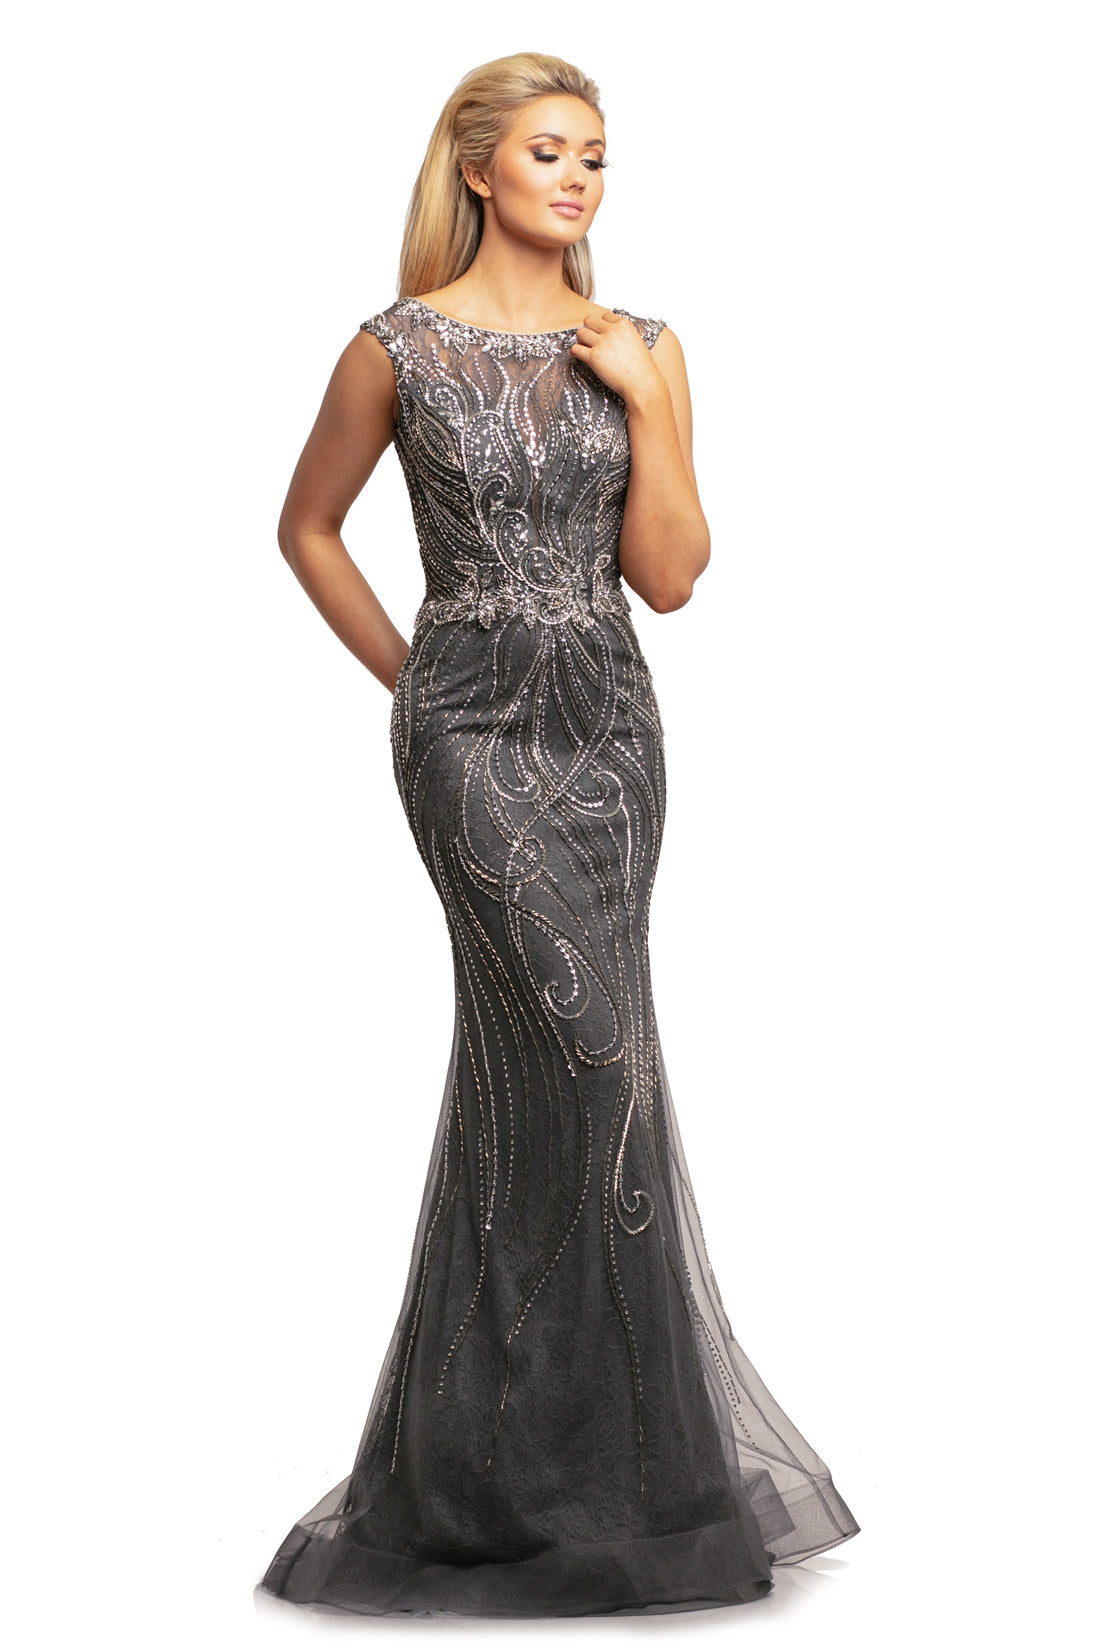 Johnathan Kayne 2042 Fit & Flare Lace Prom Dress. Sheer Illusion Embellished High Neckline with Plunging neckline underlay. Floral swirl embellishments adorn the bodice and cascade into the skirt. Sheer Illusion lace back with embellishments.